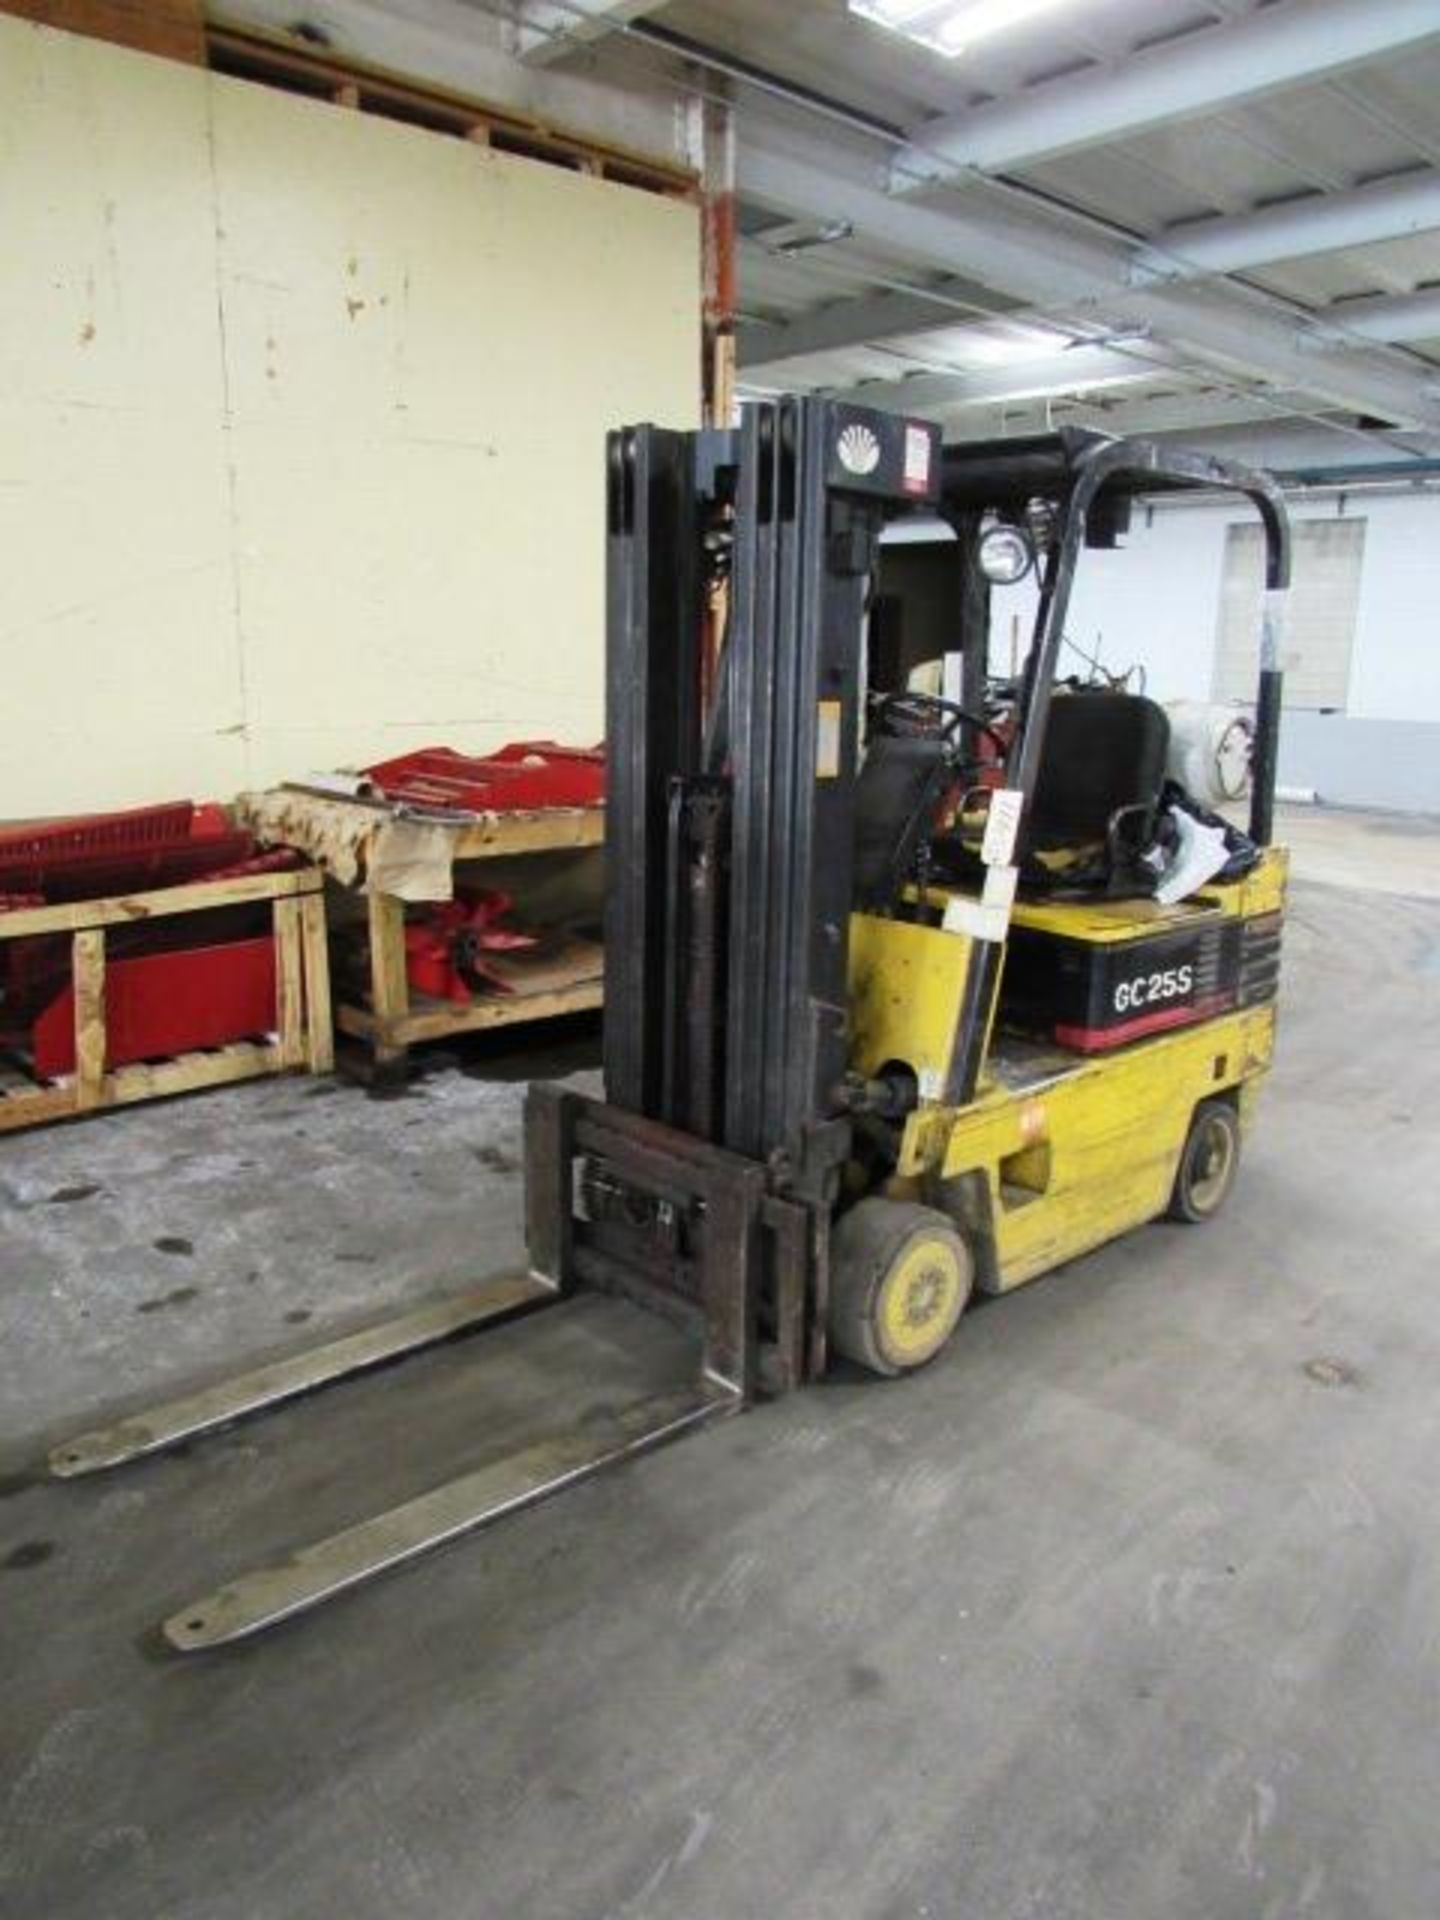 Daewoo Model GC25S 5,000lb Capacity Propane Forklift with (4) Hard Tires, 3-Stage Mast with Side - Image 3 of 7